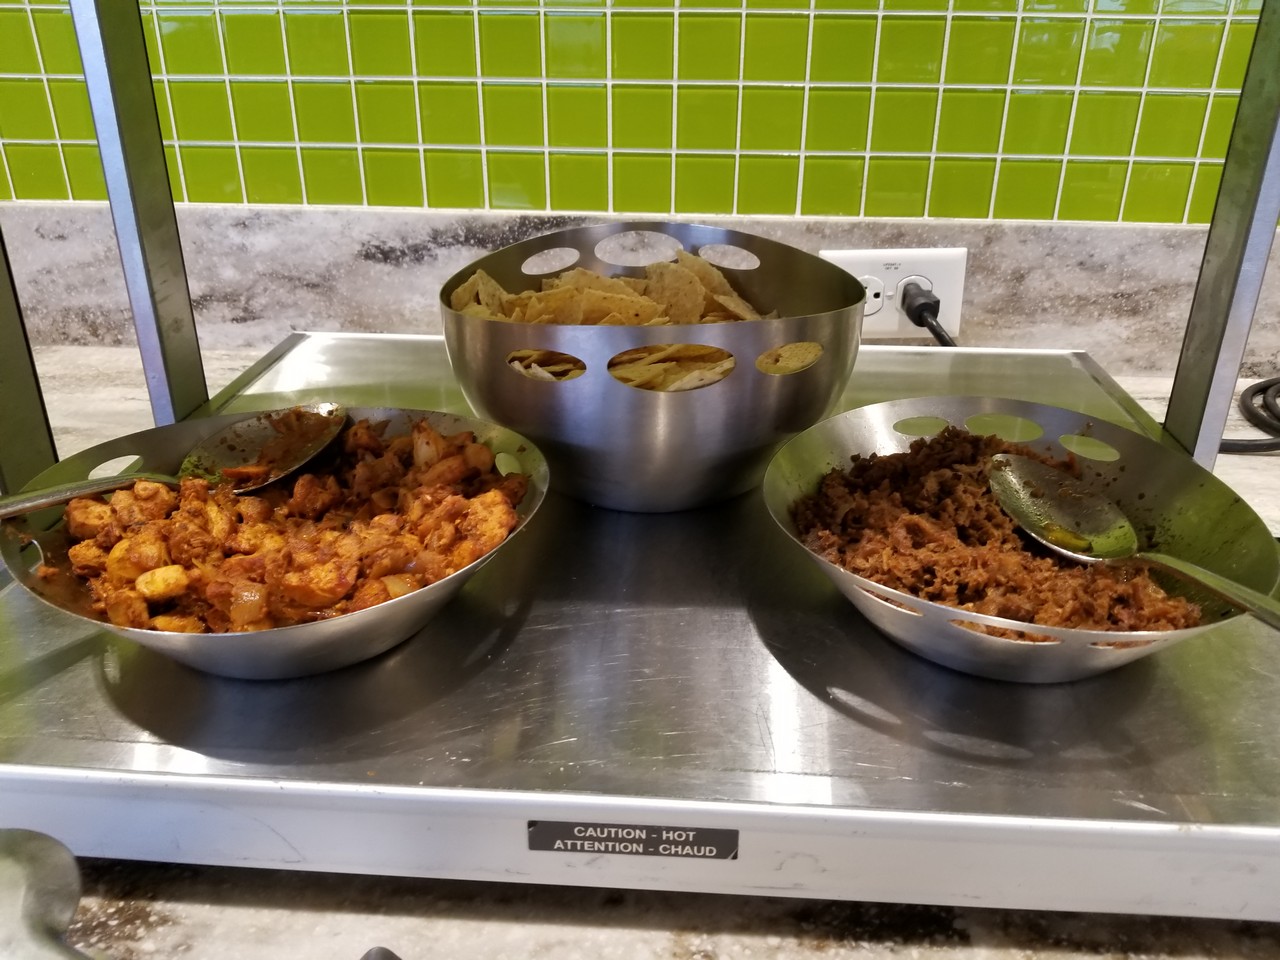 bowls of food in bowls on a counter